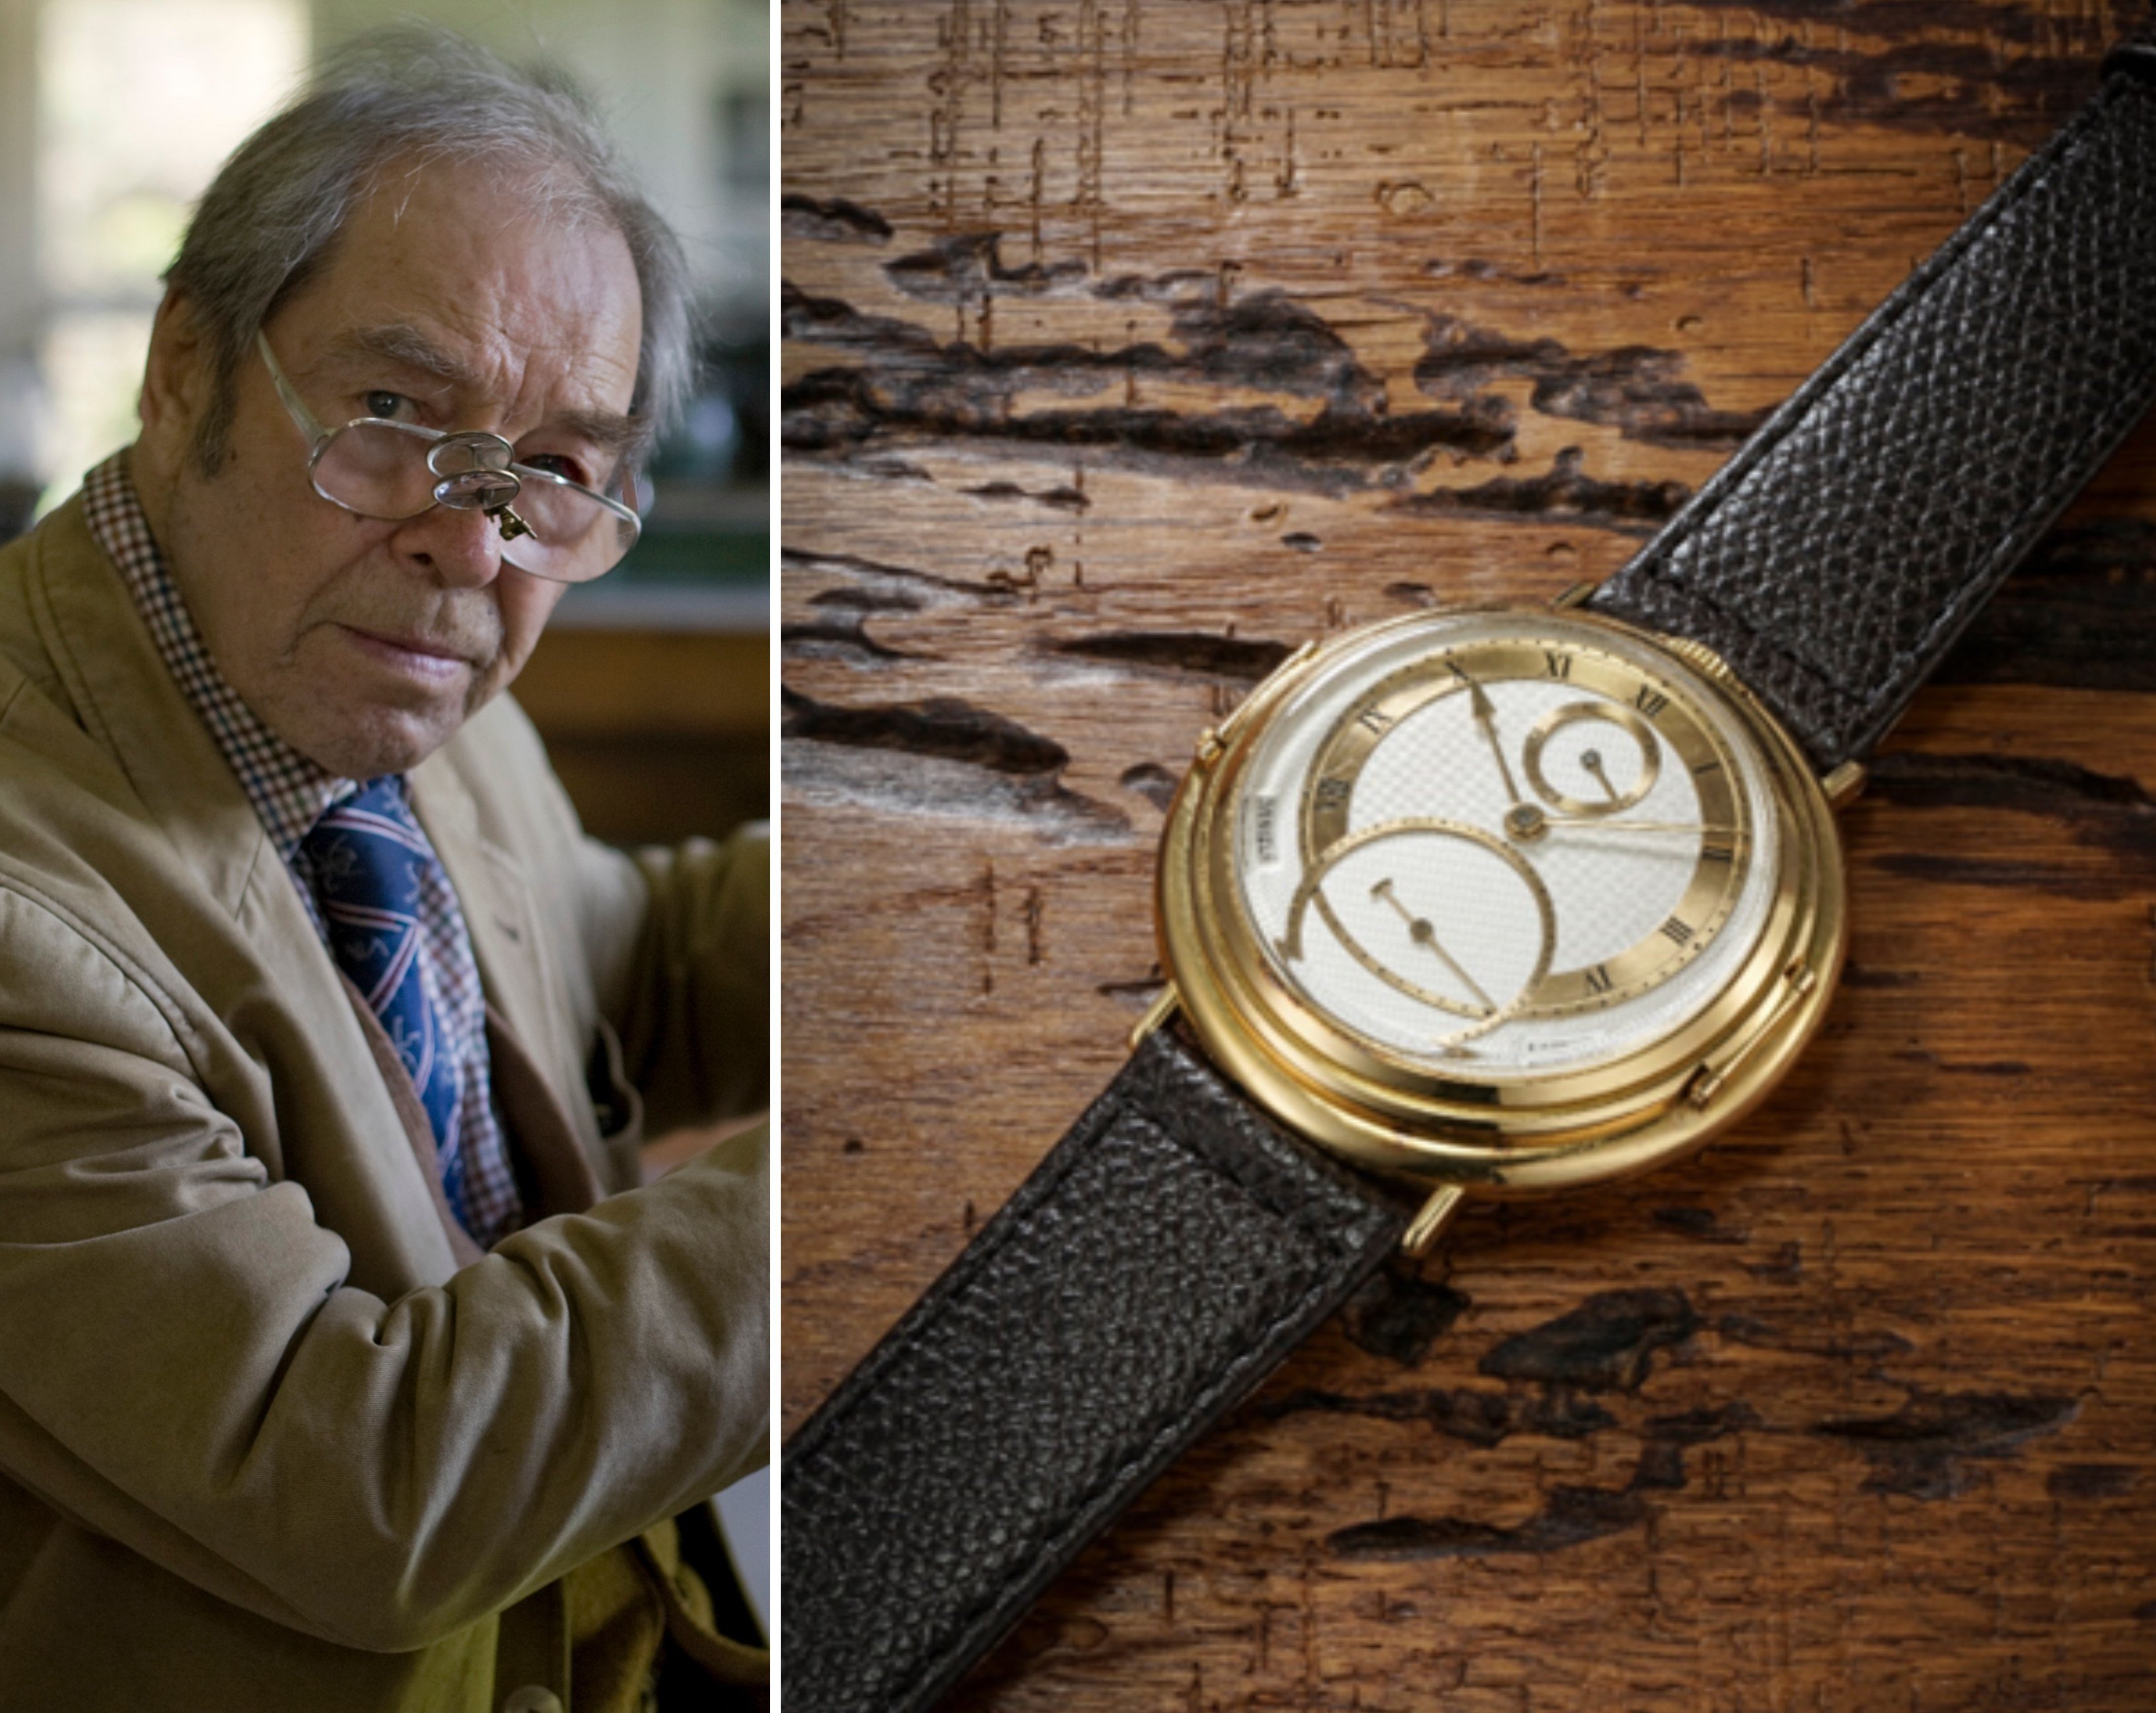 George Daniels made the Spring Case Tourbillon for himself, and only produced 27 watches in his lifetime. Photos: Getty Images; Phillips